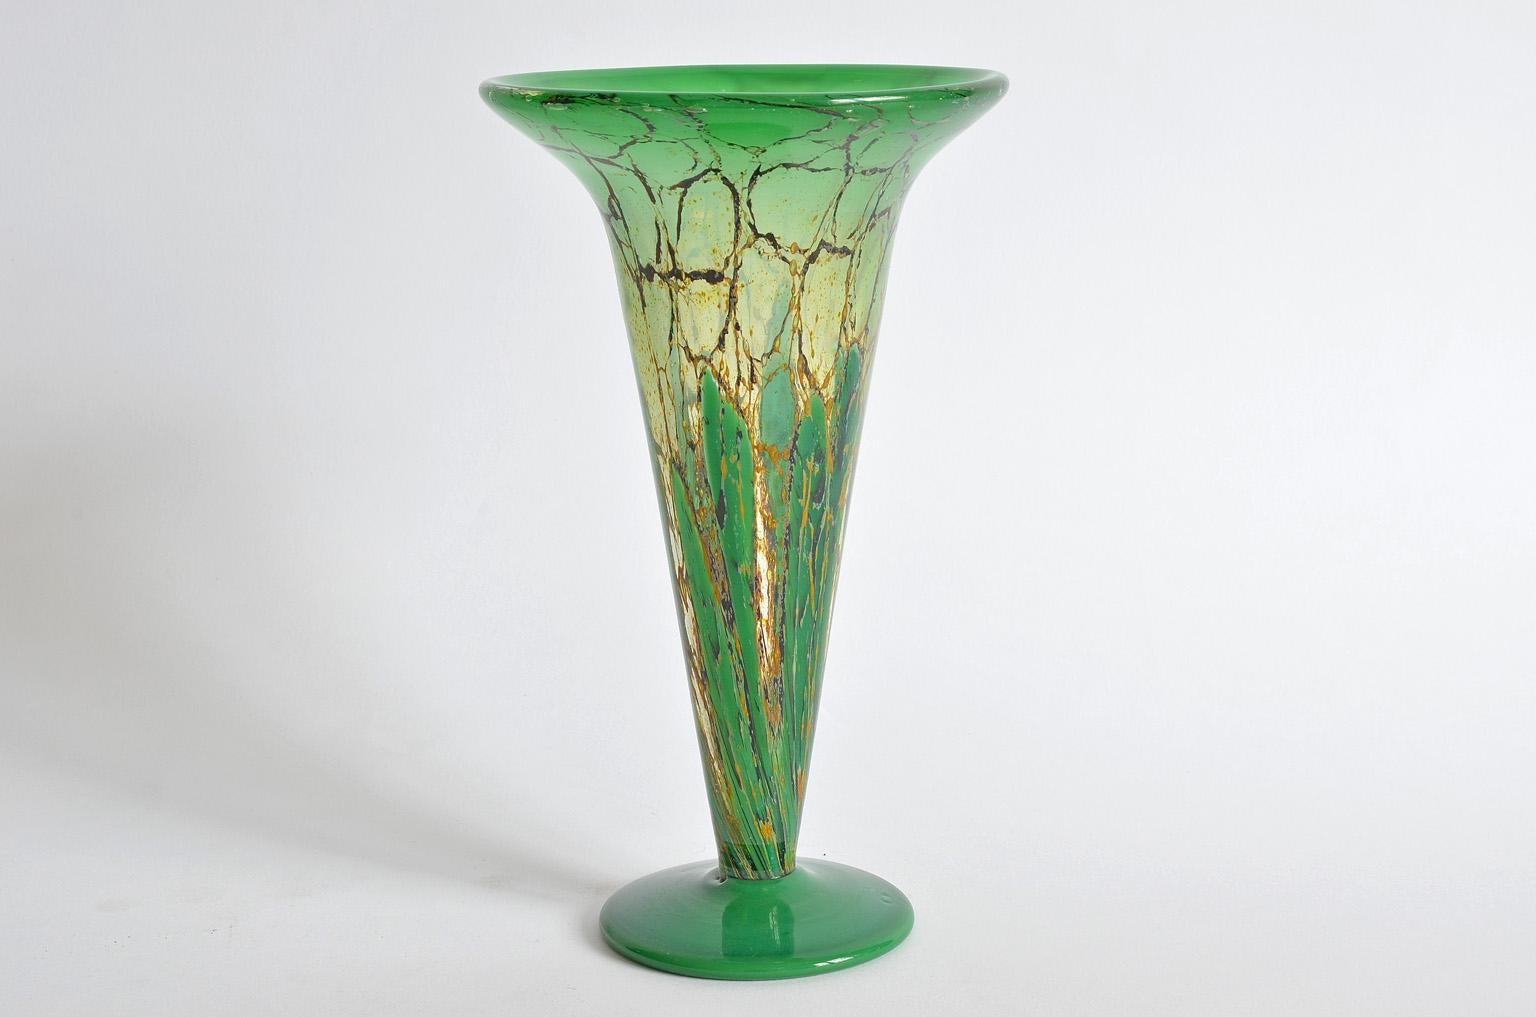 Mid-20th Century WMF Ikora Flared Trumpet Glass Vase Art Deco Green Colored, Germany, 1930s For Sale